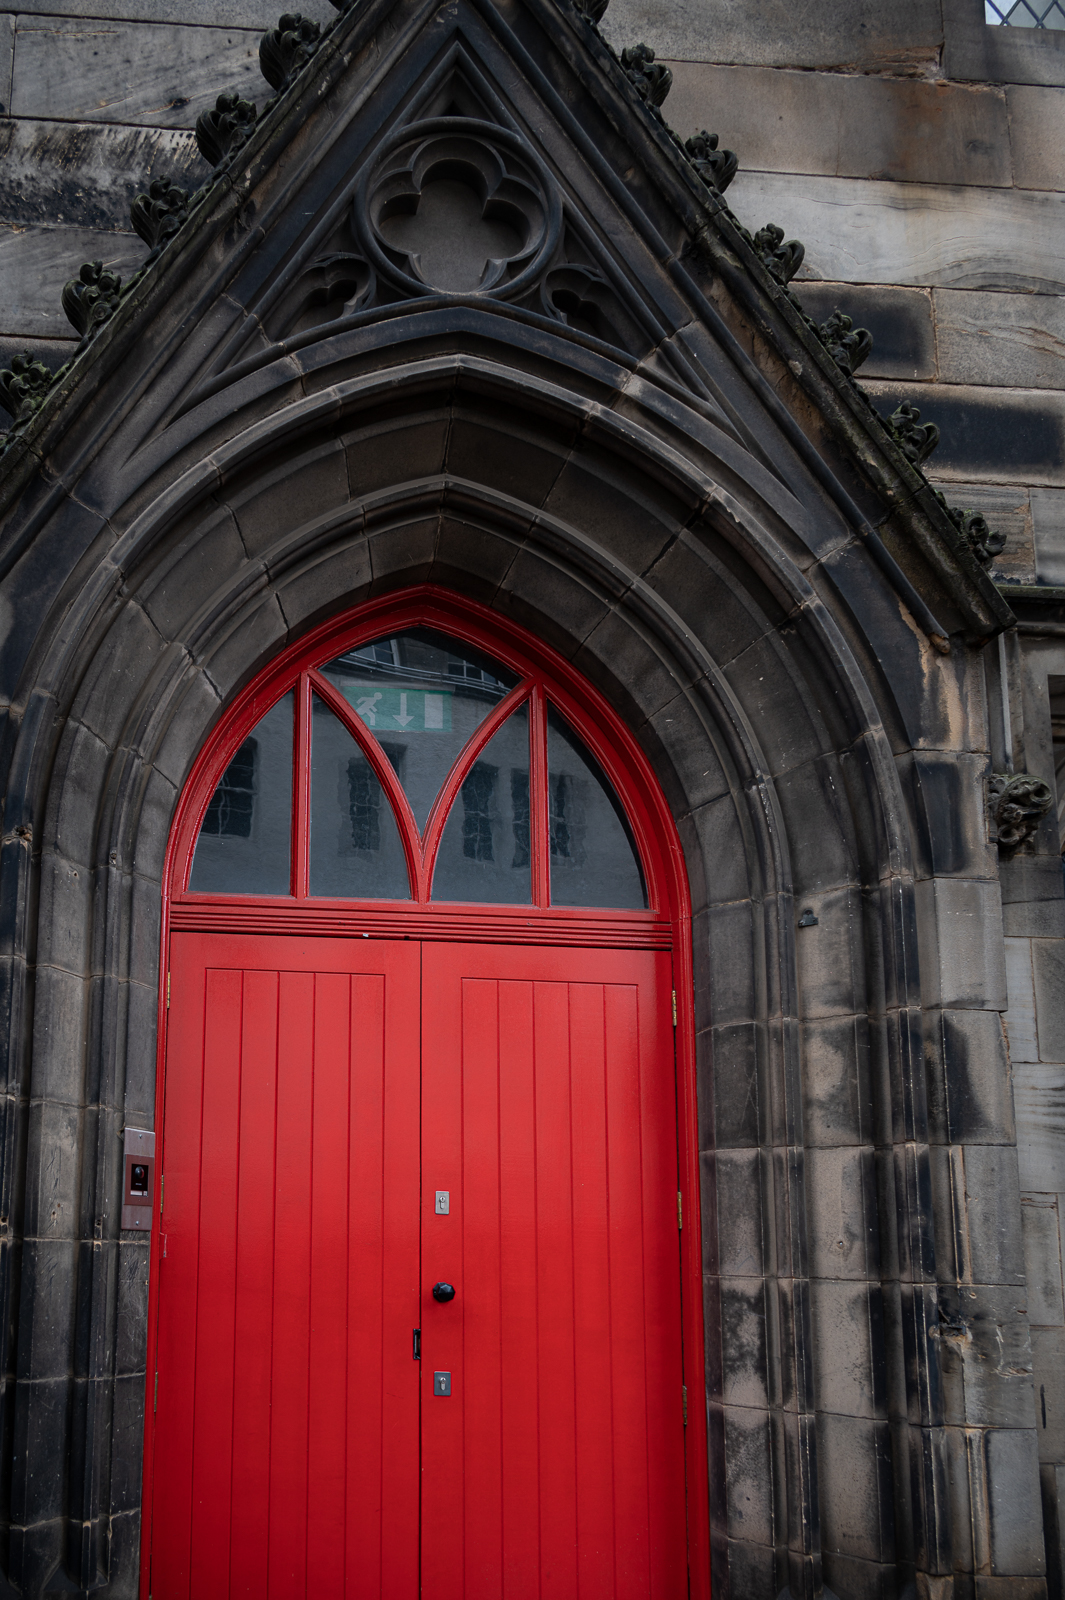 Arched red door with weathered stone gable.